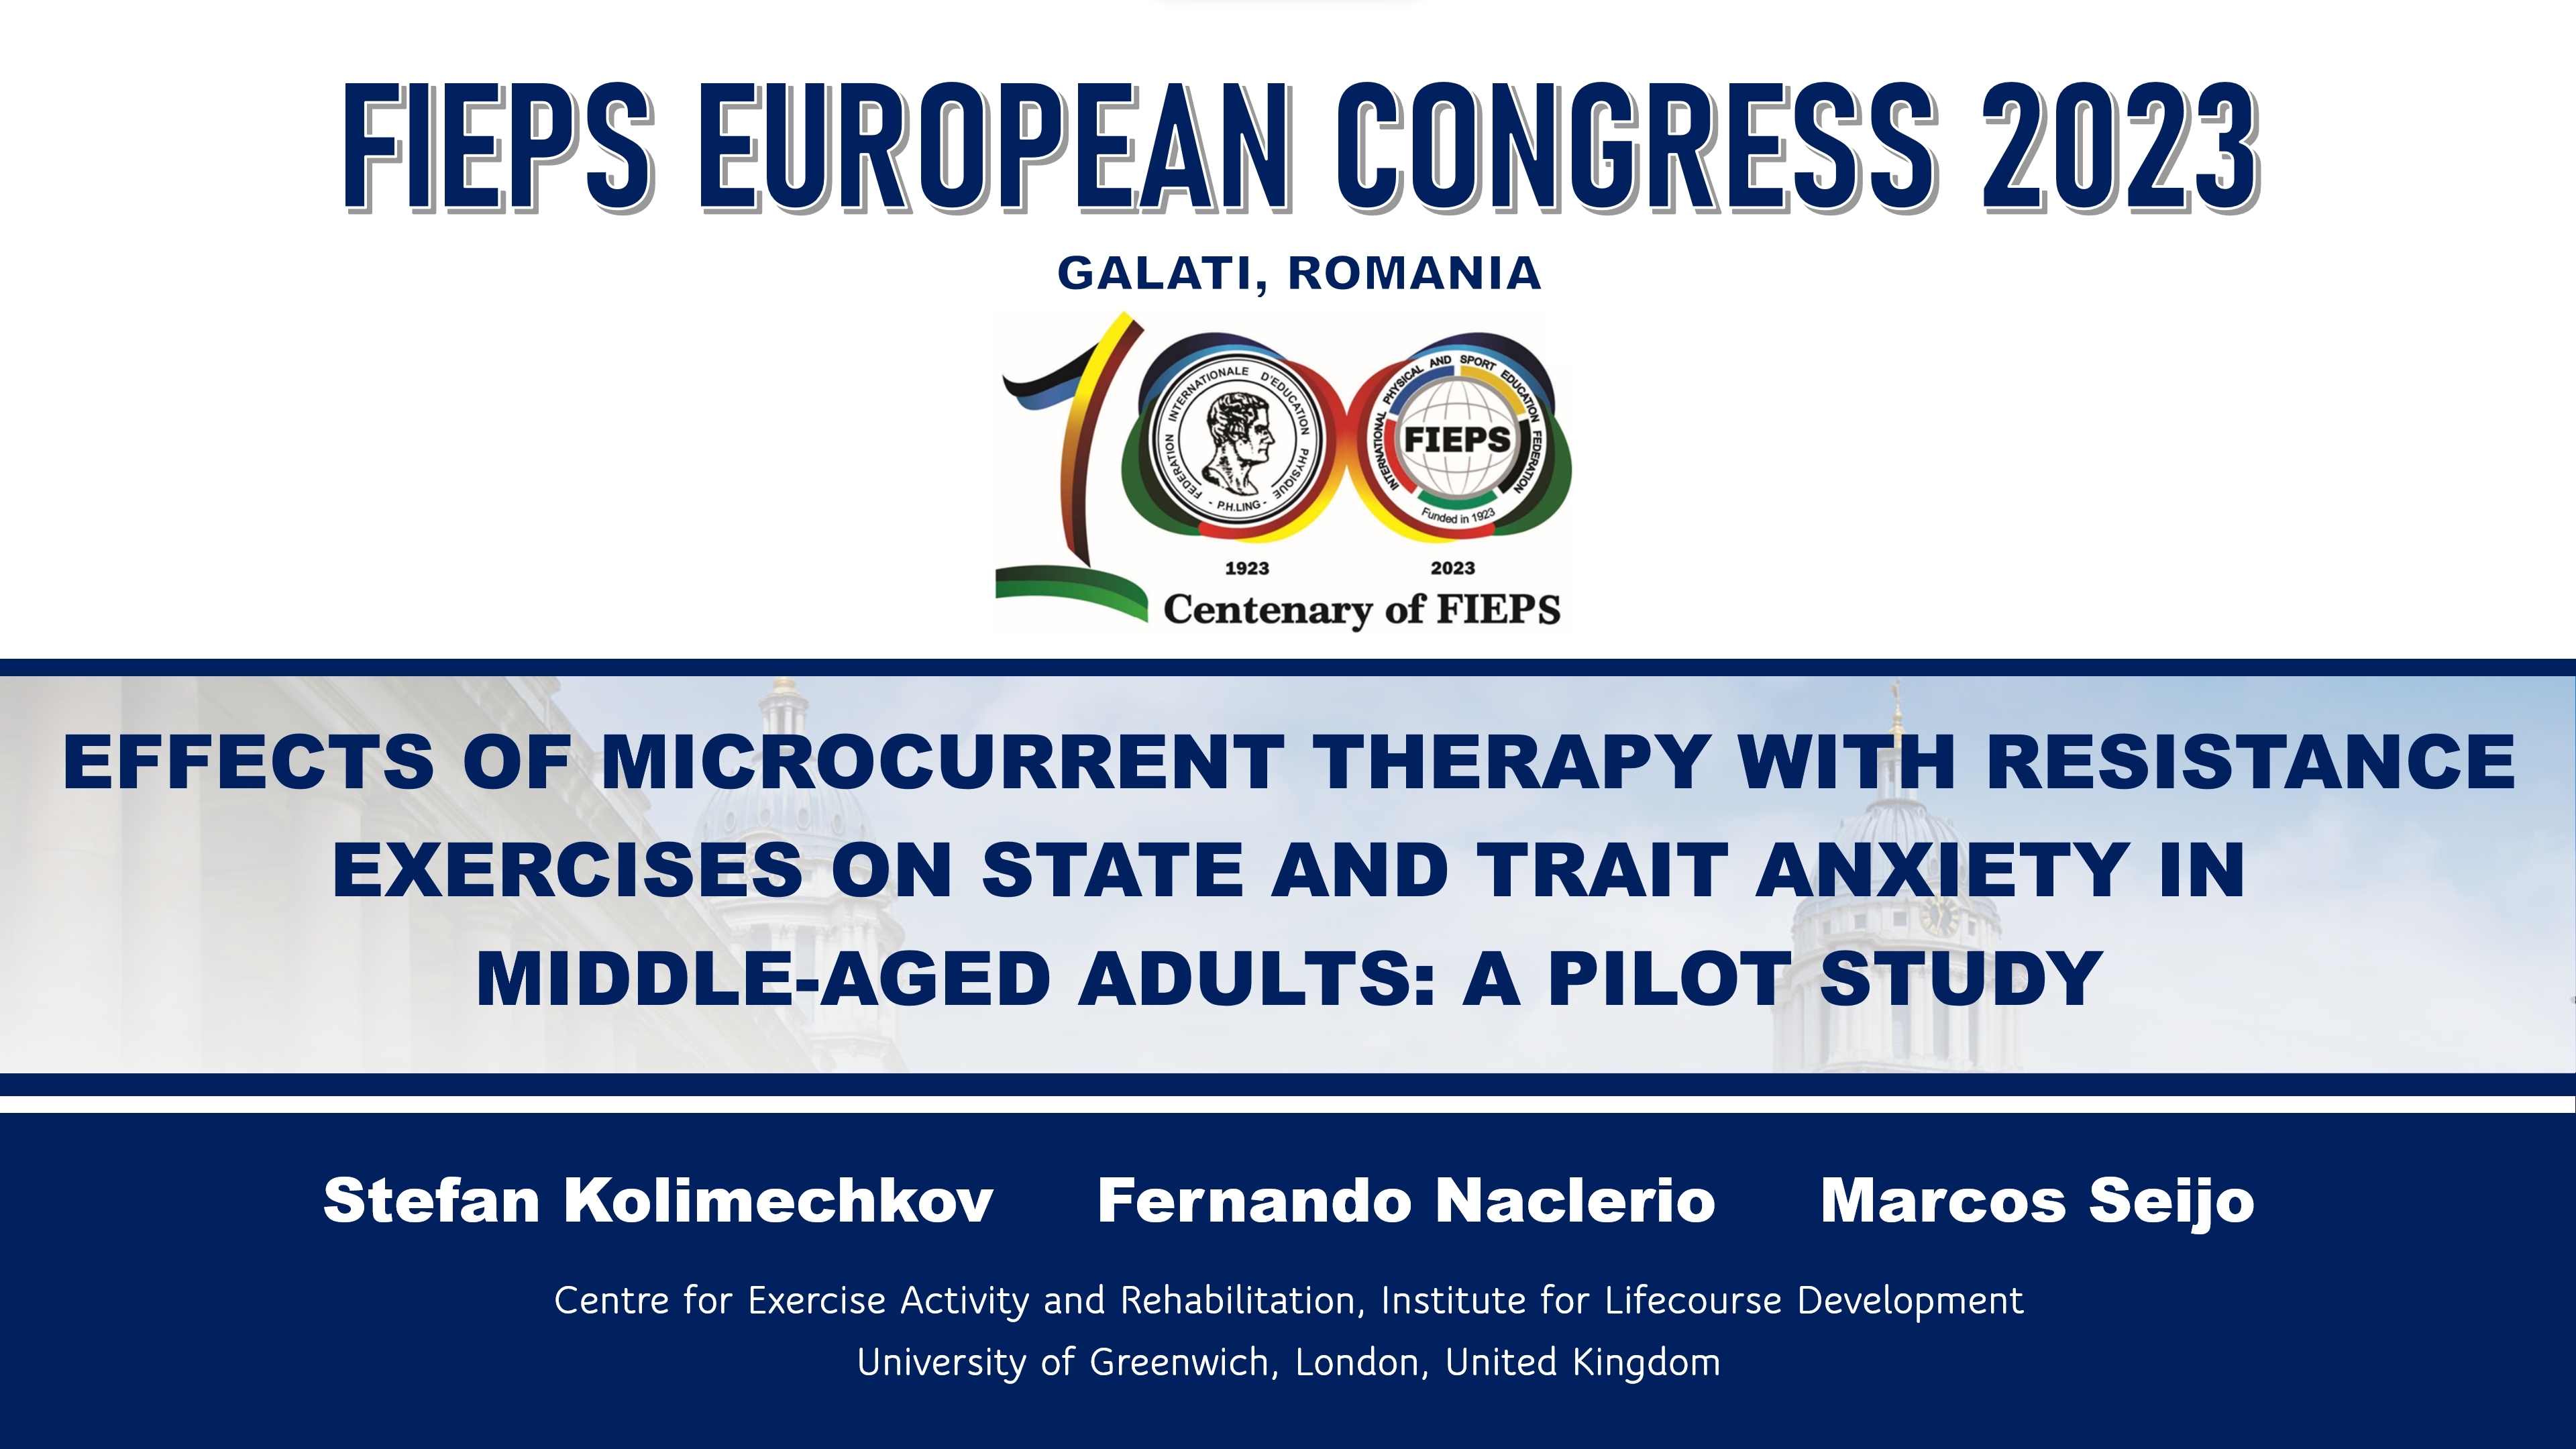 Effects of microcurrent therapy with resistance exercises on state and trait anxiety in middle-aged adults: A pilot study at the FIEPS Congress in Galati 2023